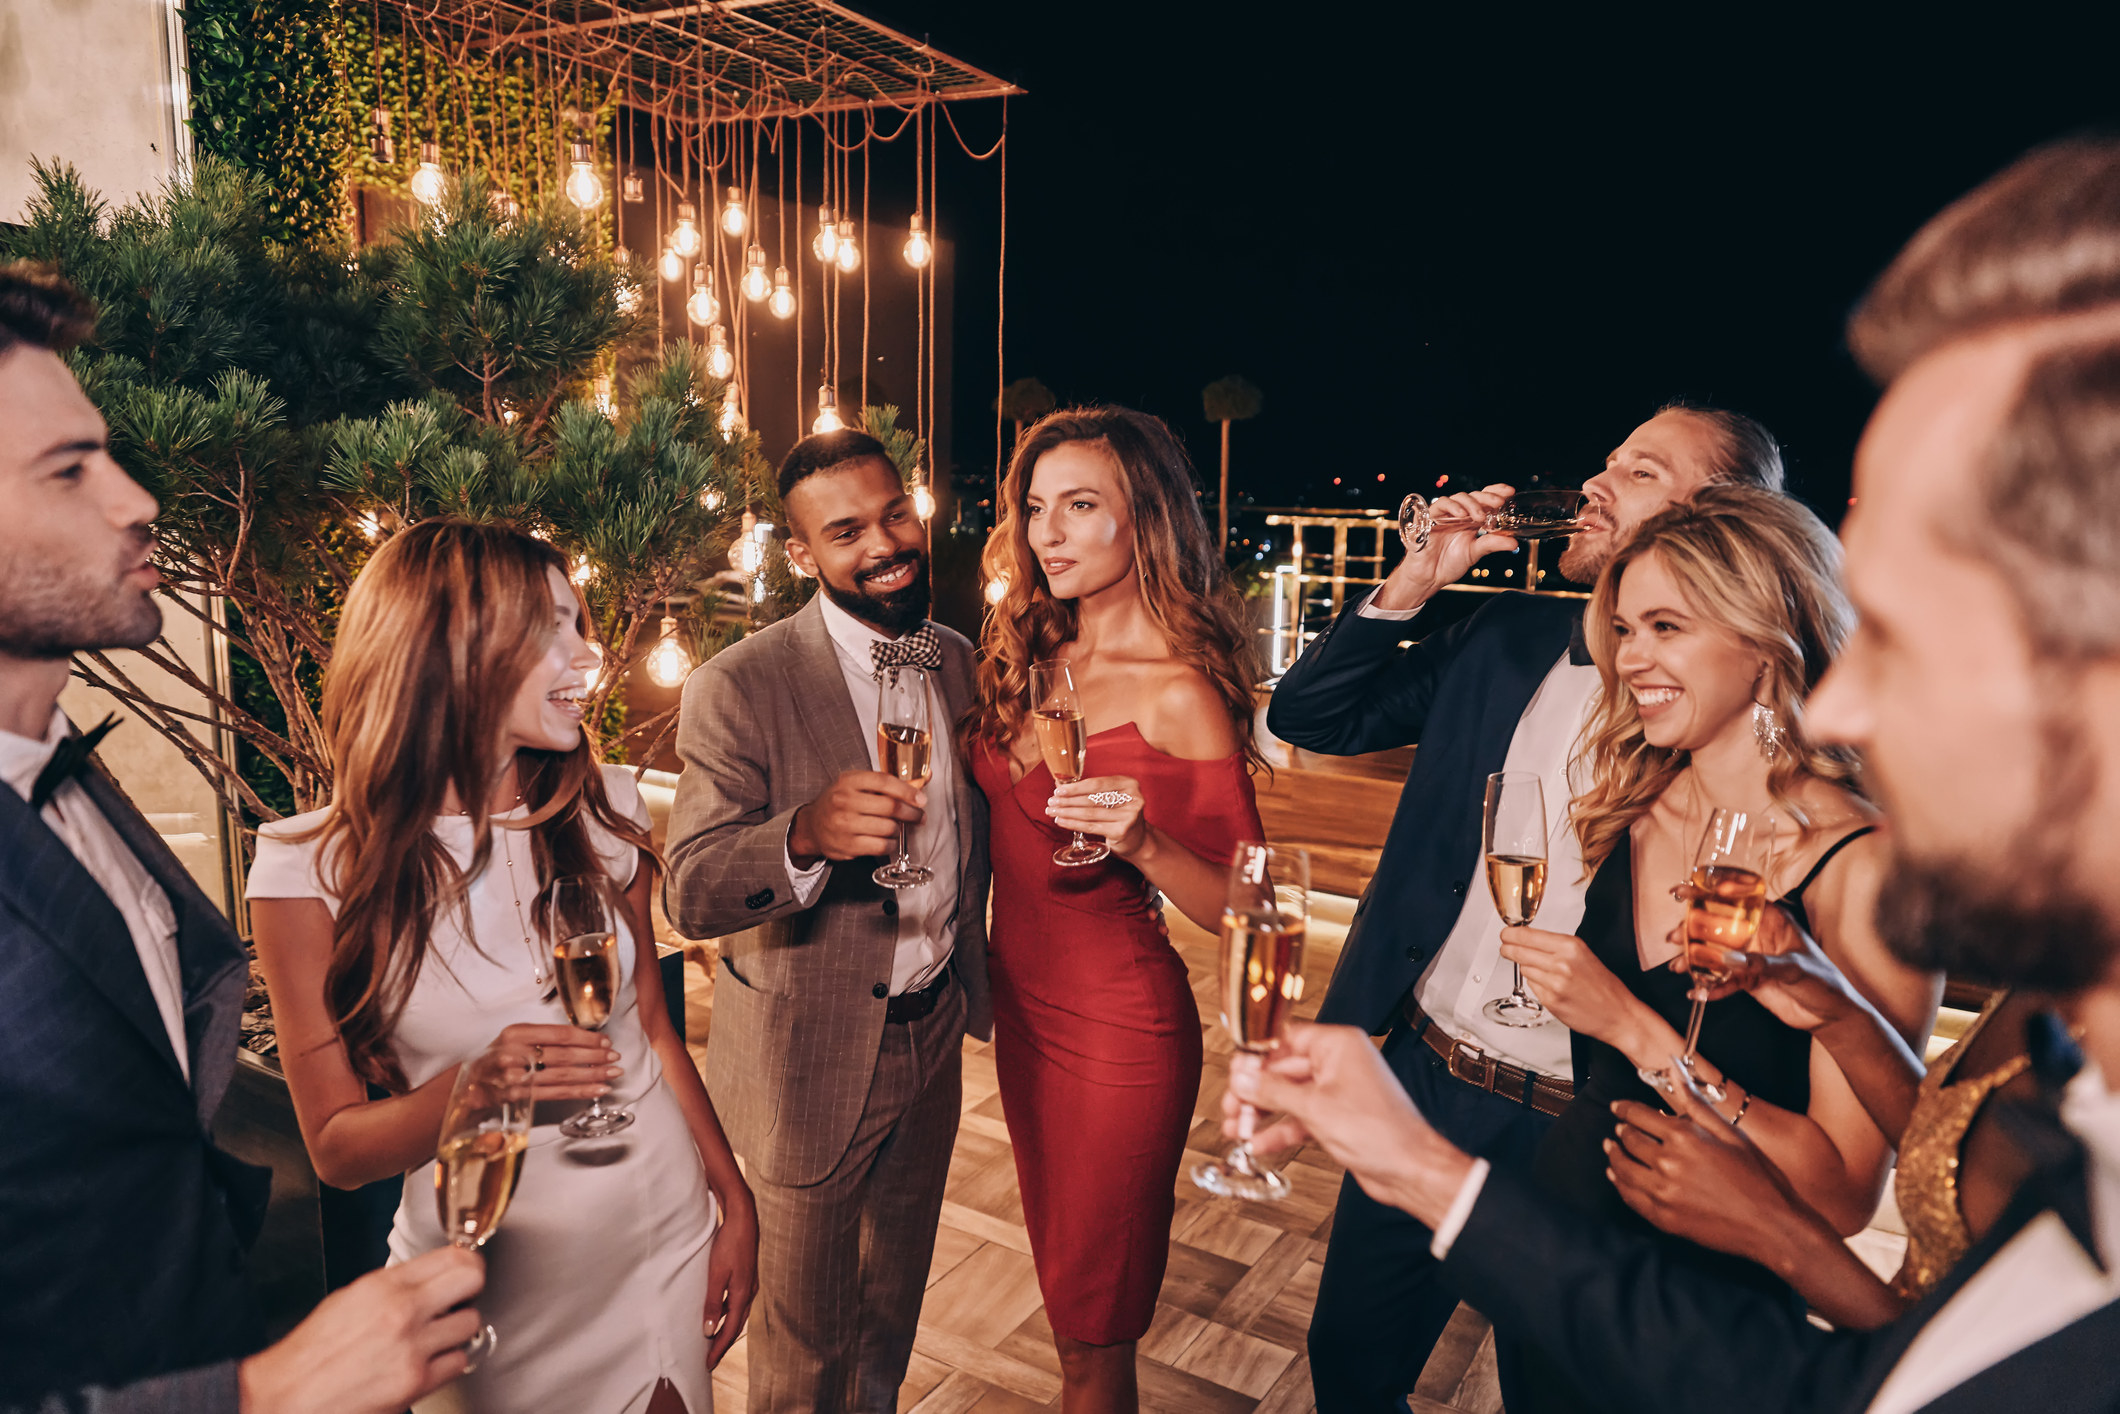 People at a party holding glasses of champagne